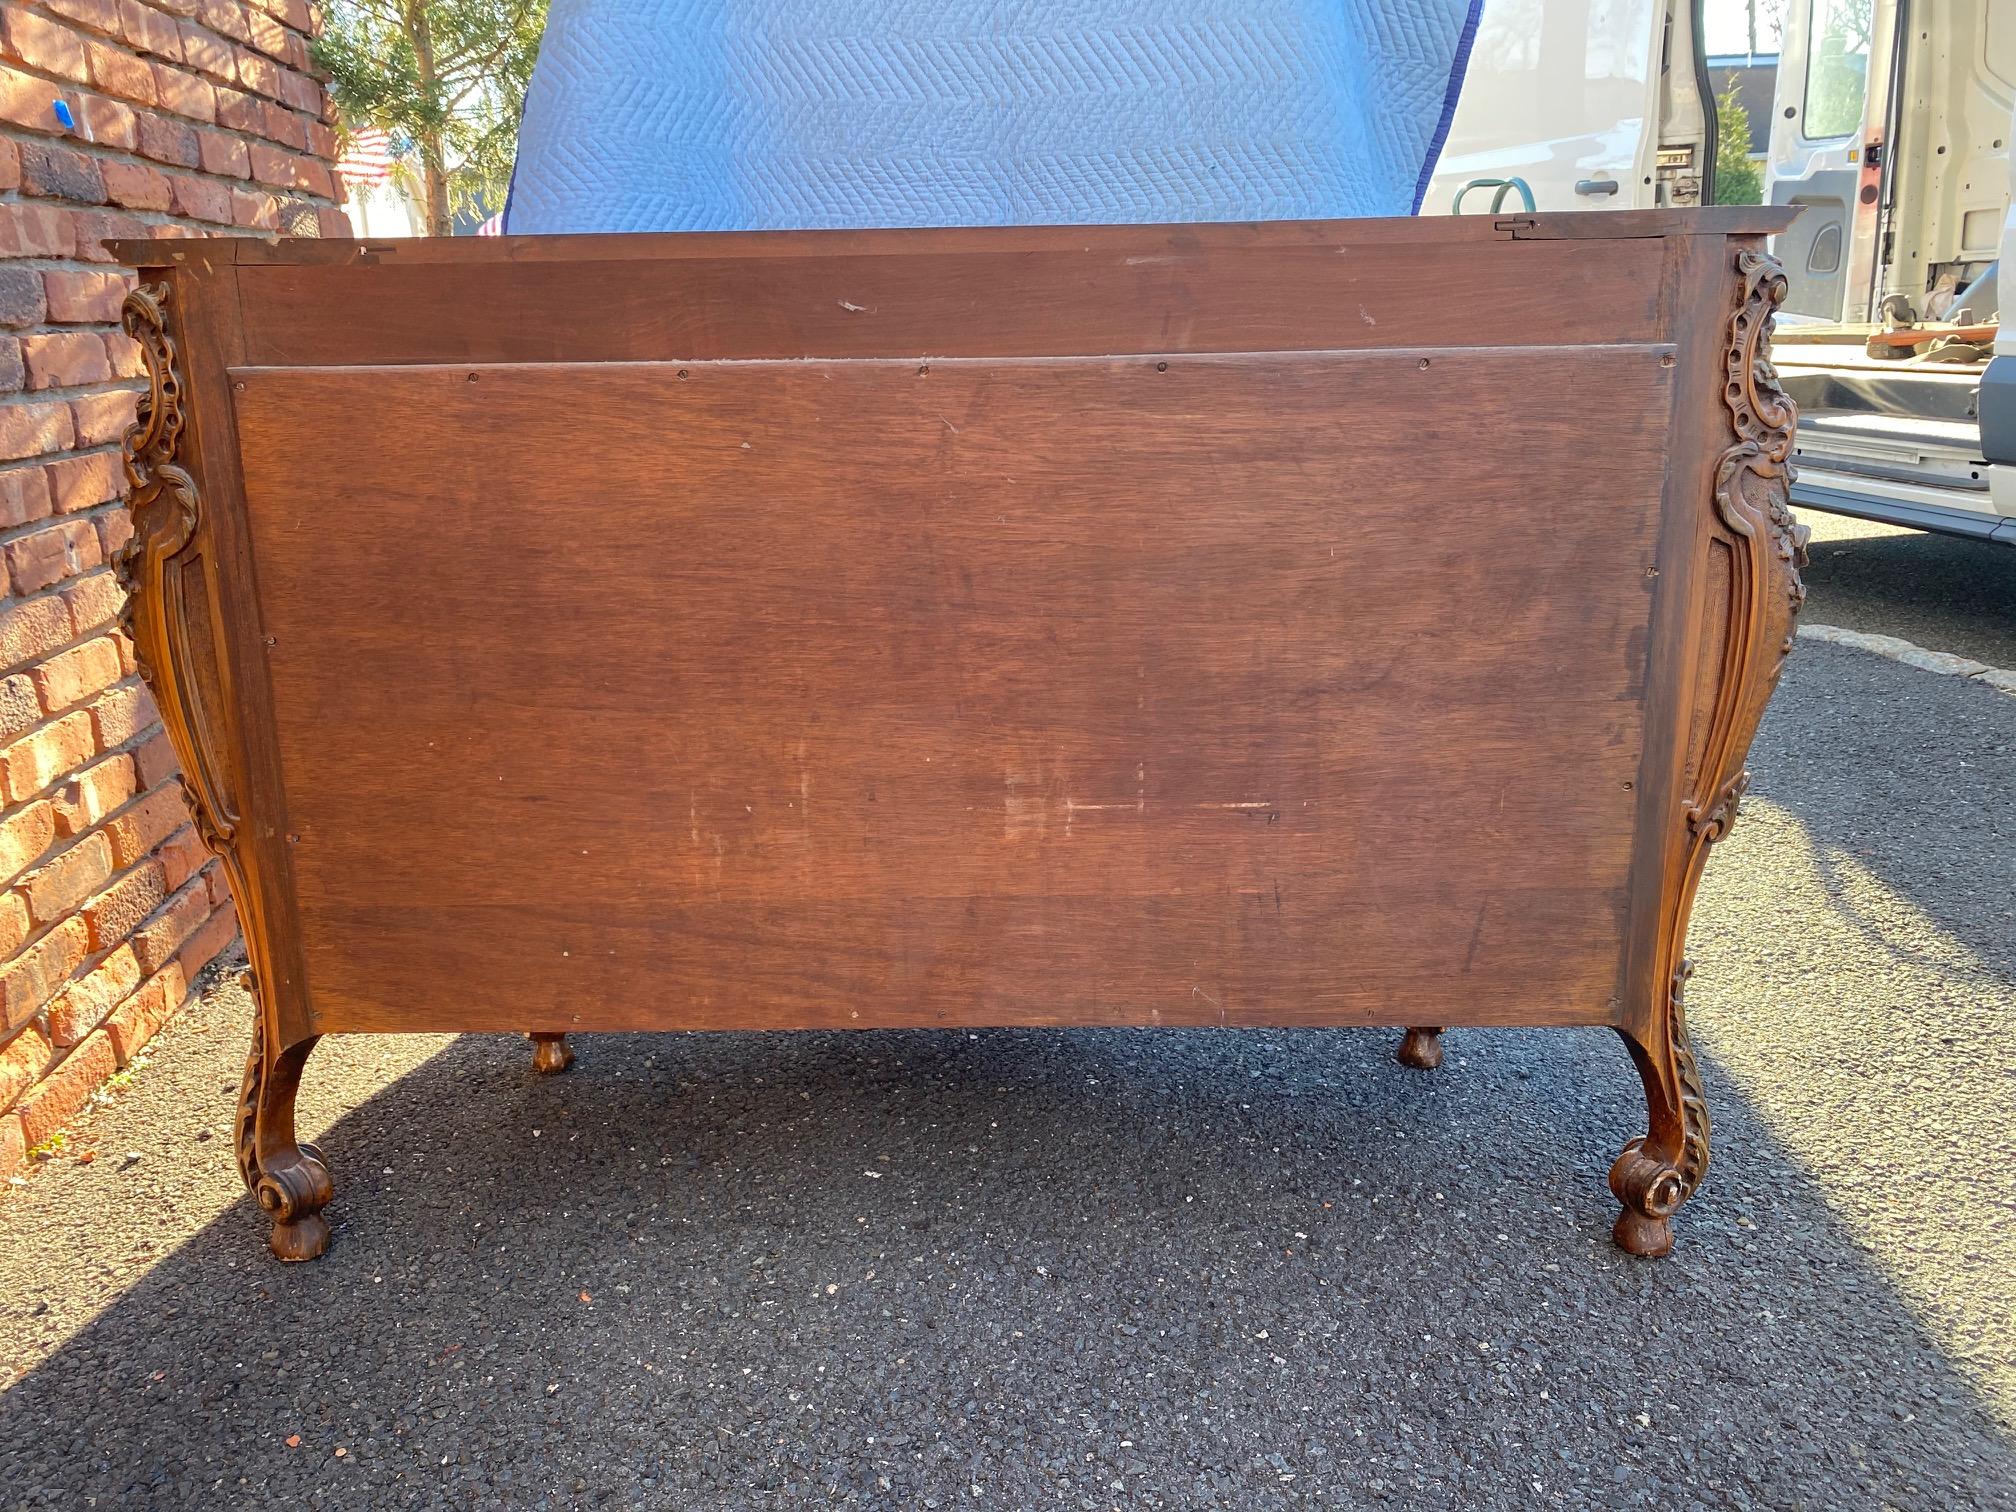 Beautifully detailed vintage Italian credenza. The solid 2